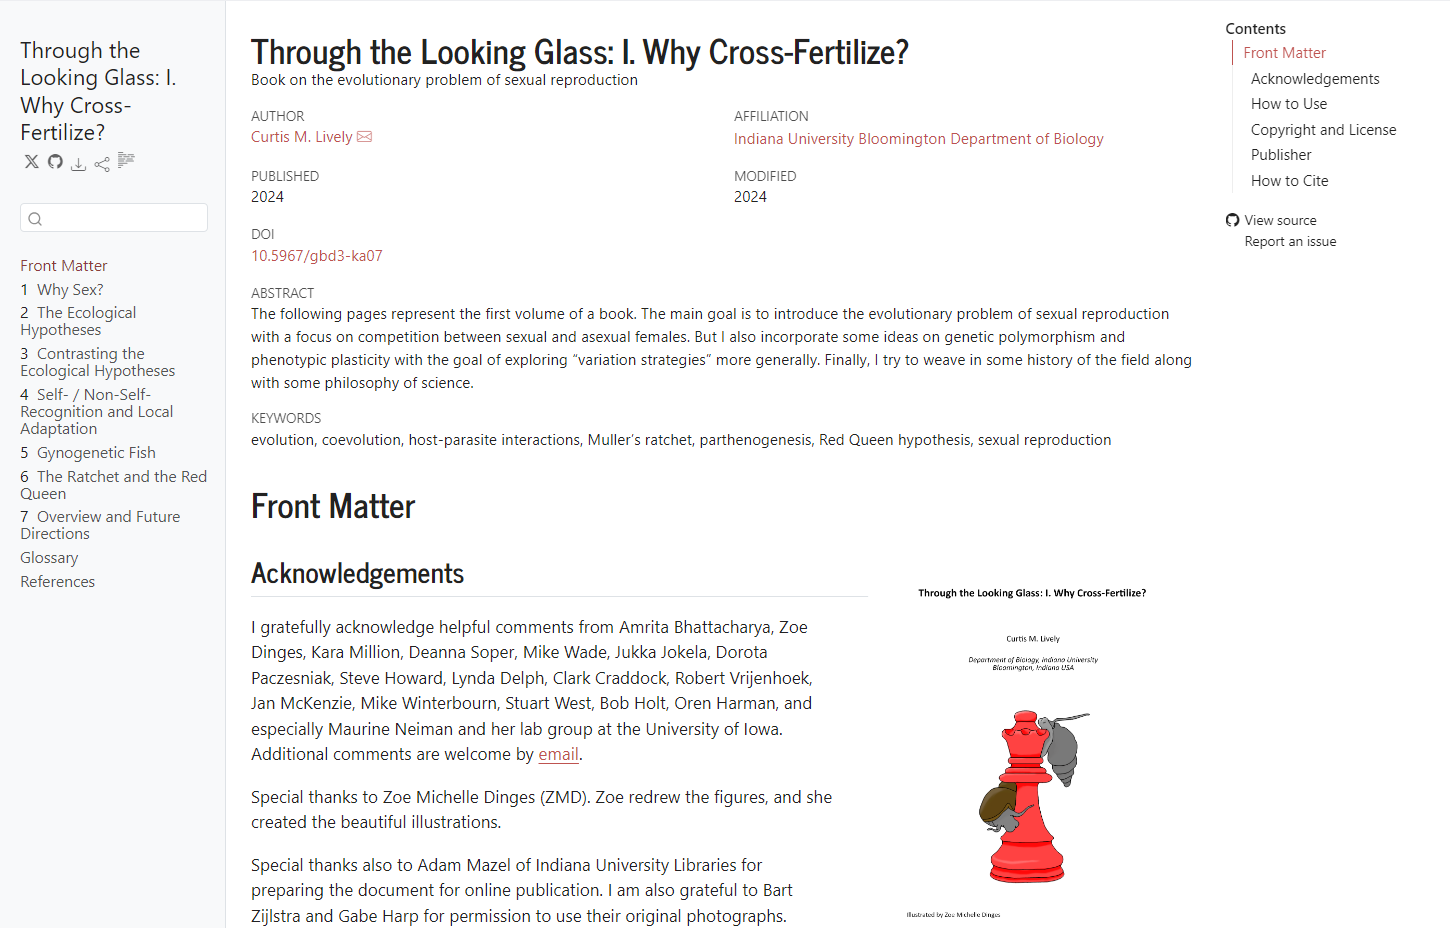 Scan of a publication with title "Through the Looking Glass."